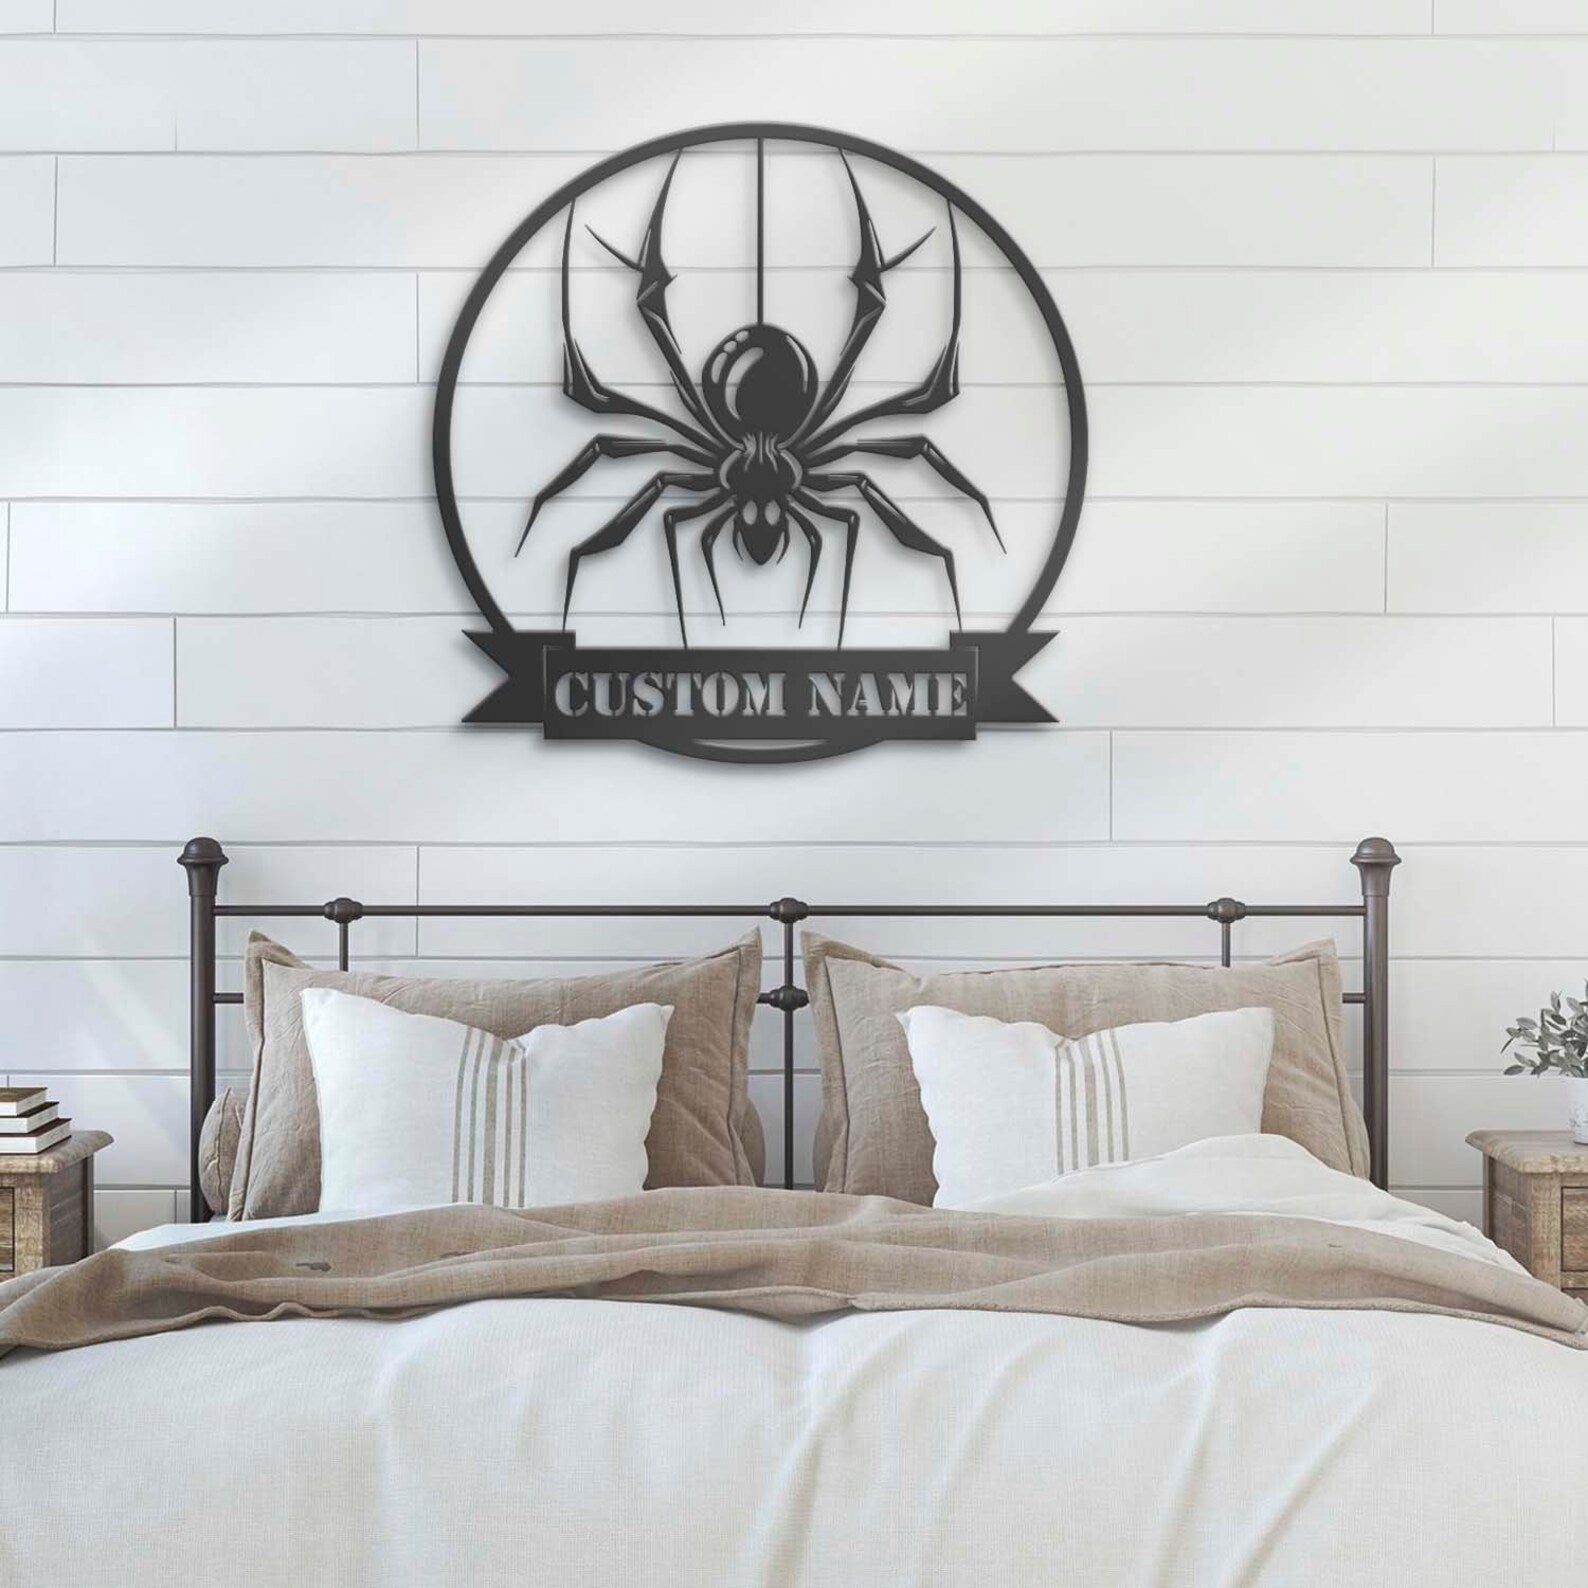 NEONIP-Personalized 100% Handmade Halloween Metal Sign LED Neon Sign with Spider